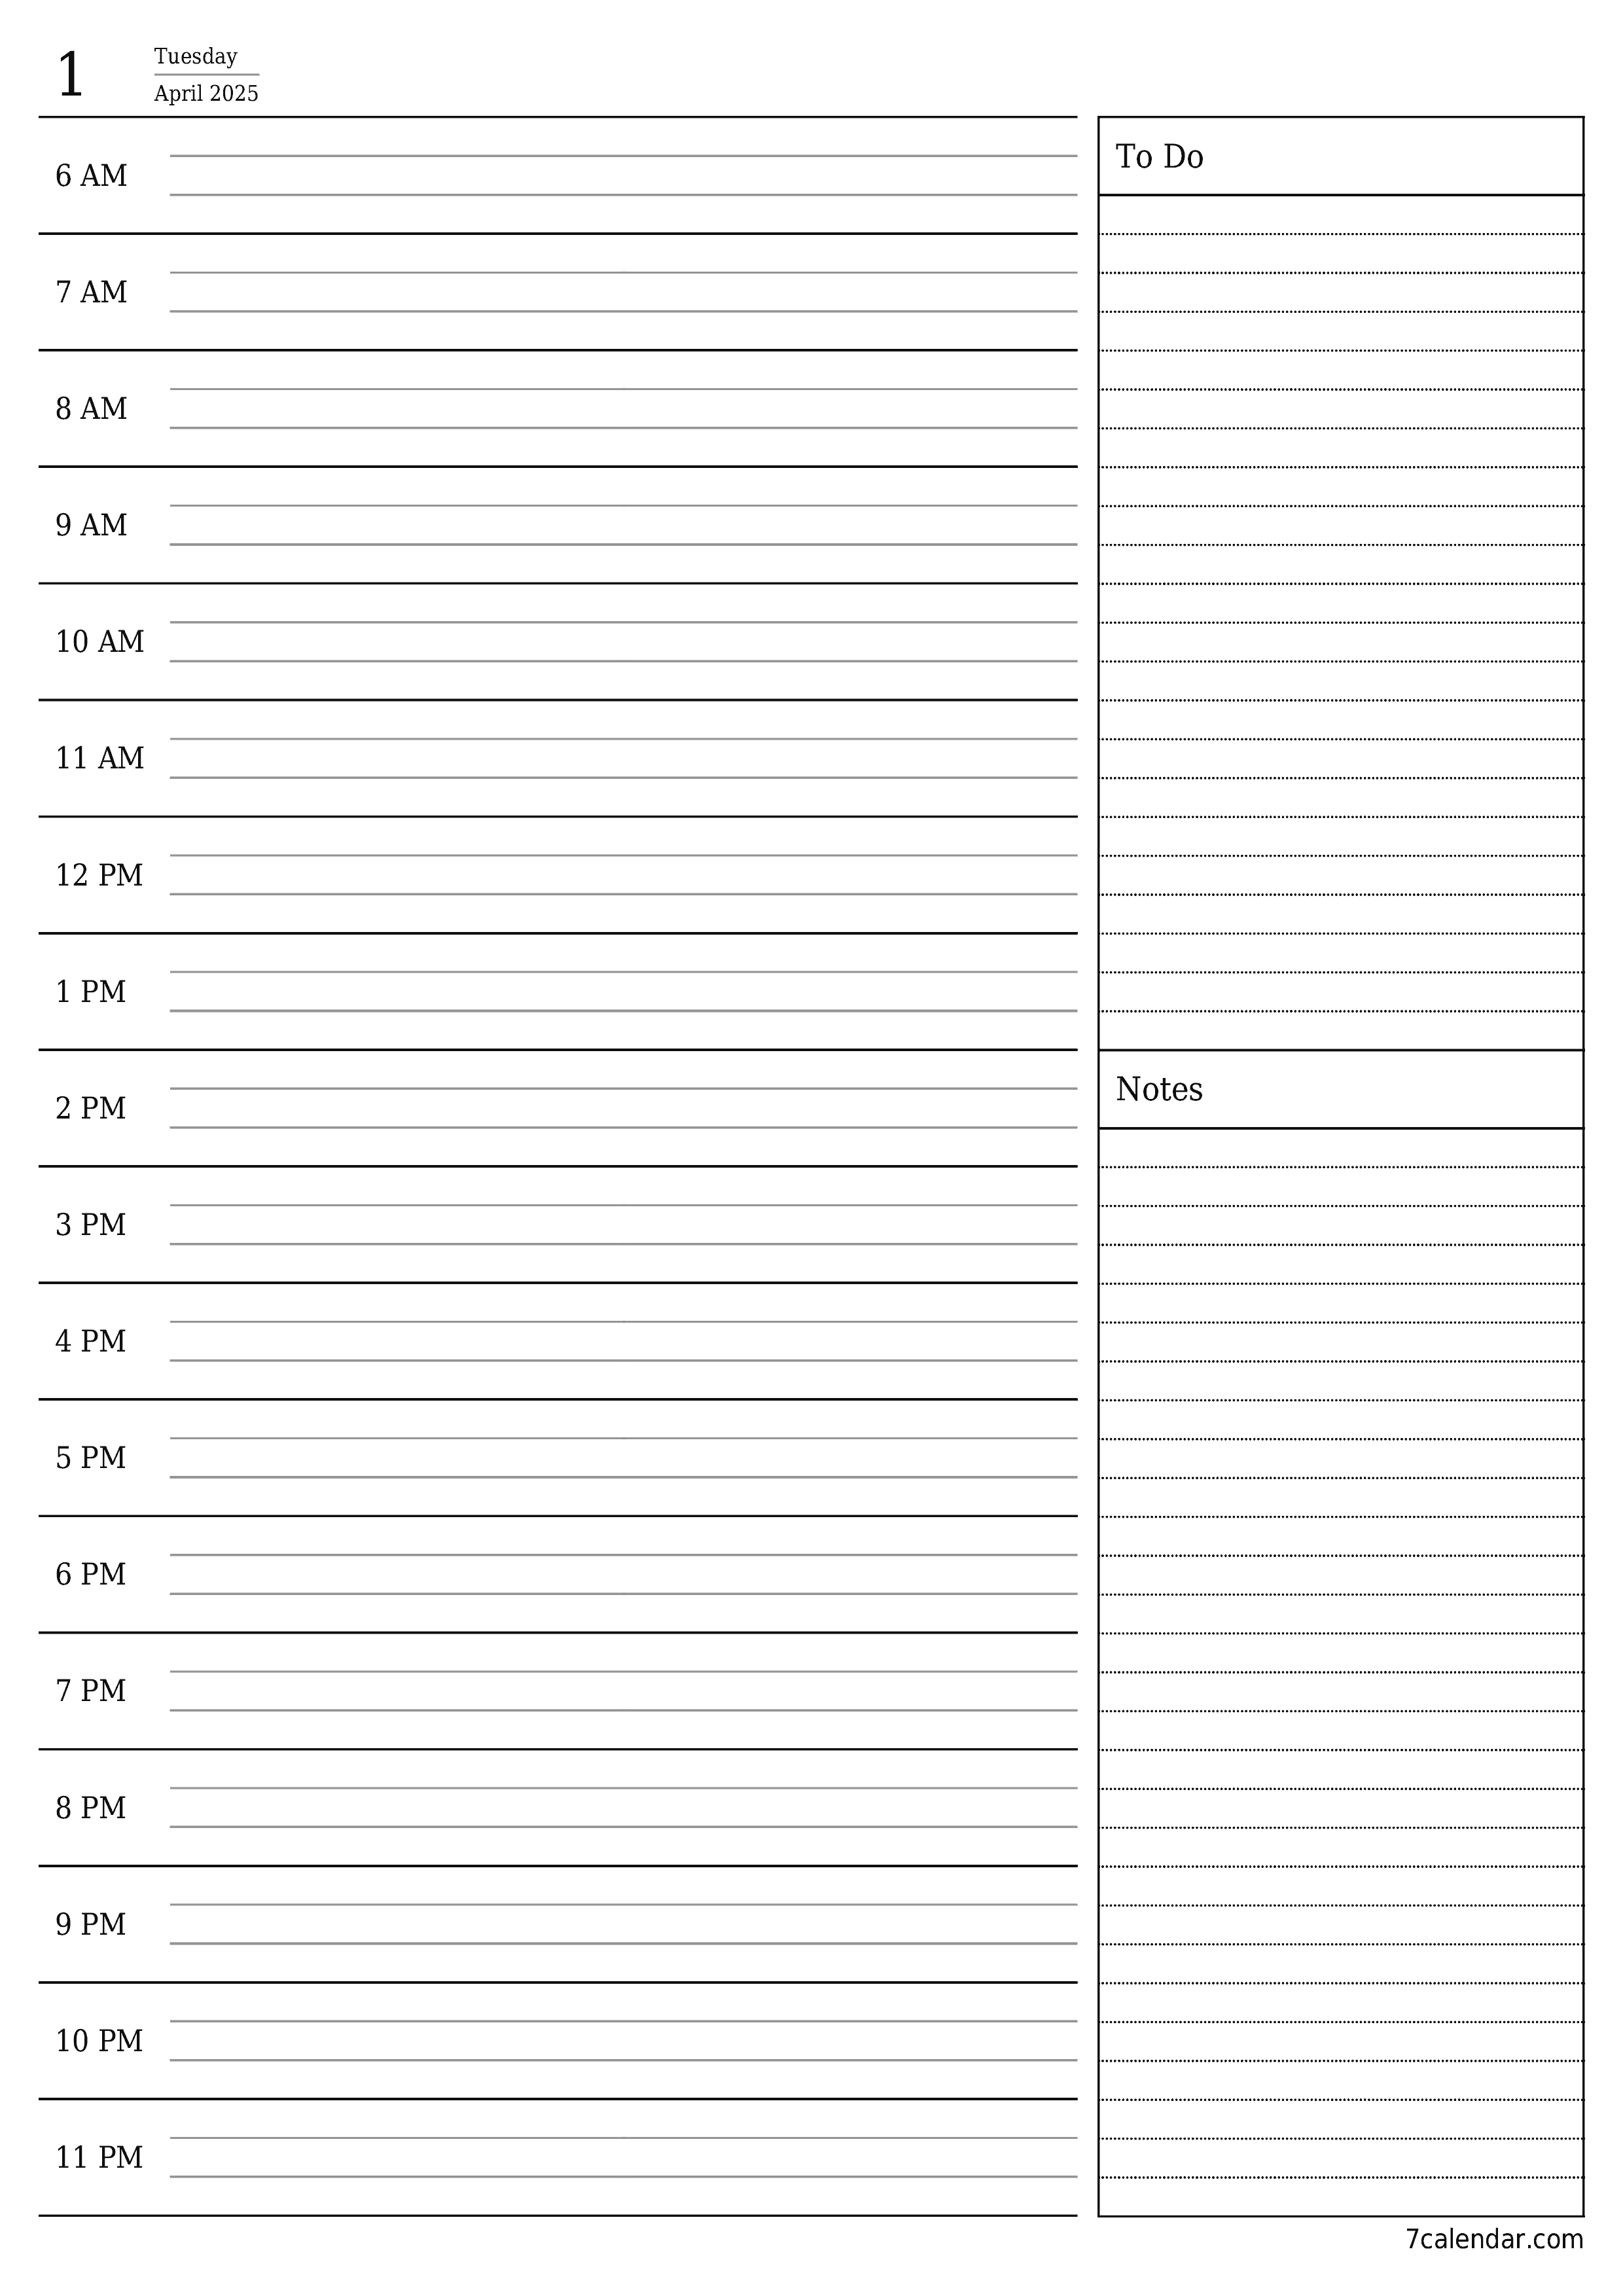 printable wall template free vertical Daily planner calendar April (Apr) 2025